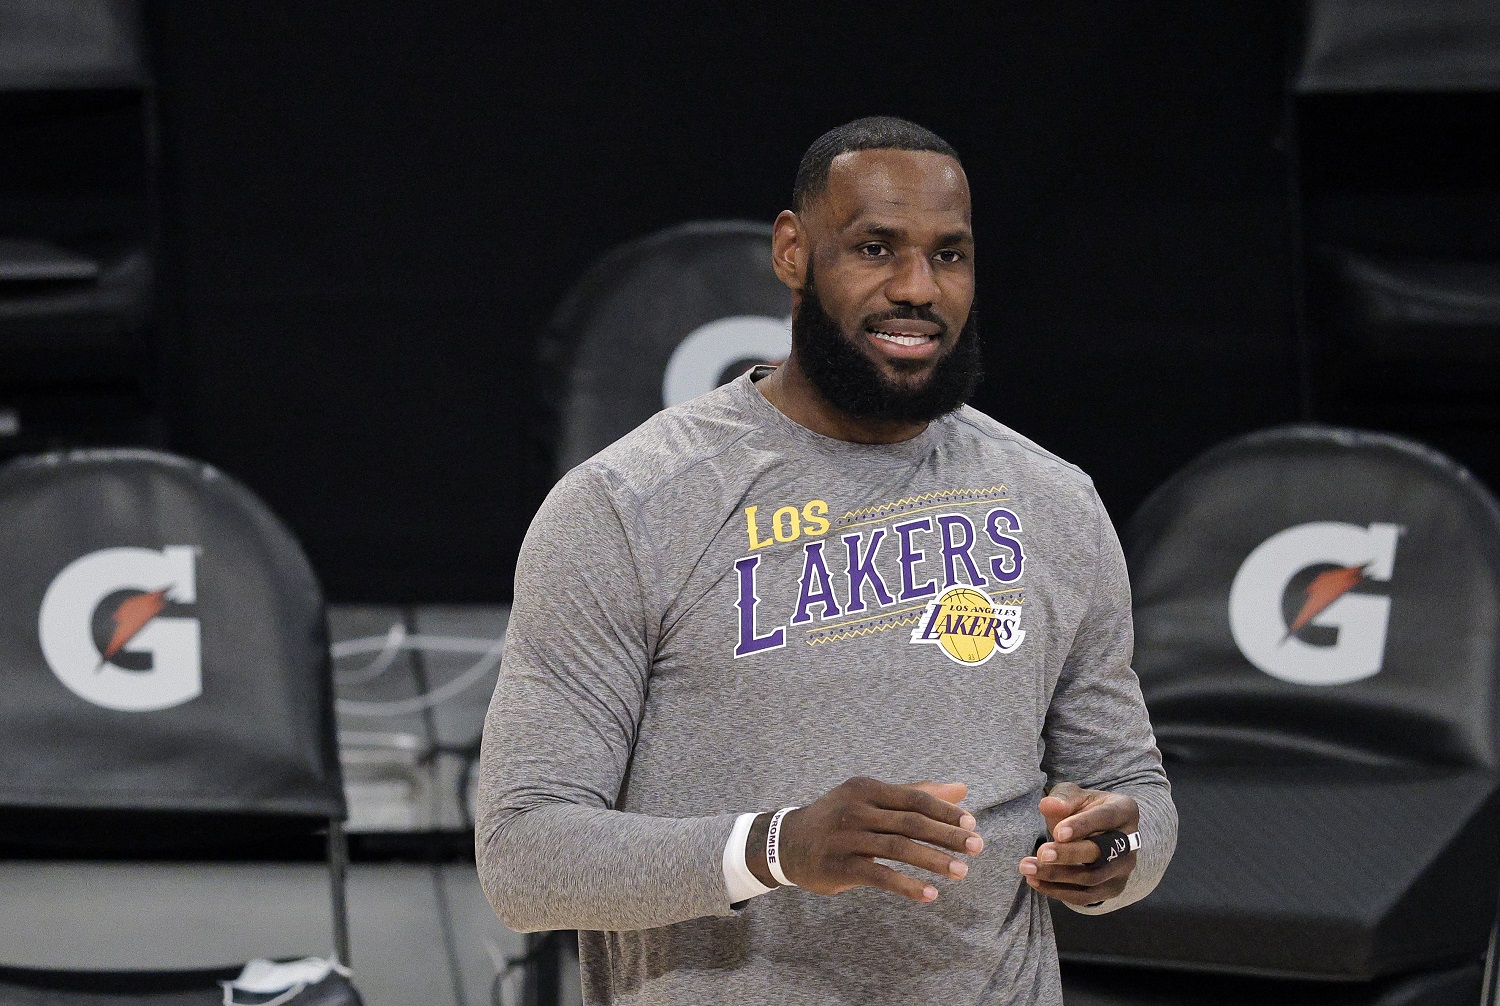 Los ANgles Lakers star LeBron James makes easy money as an endorser on Instagram.